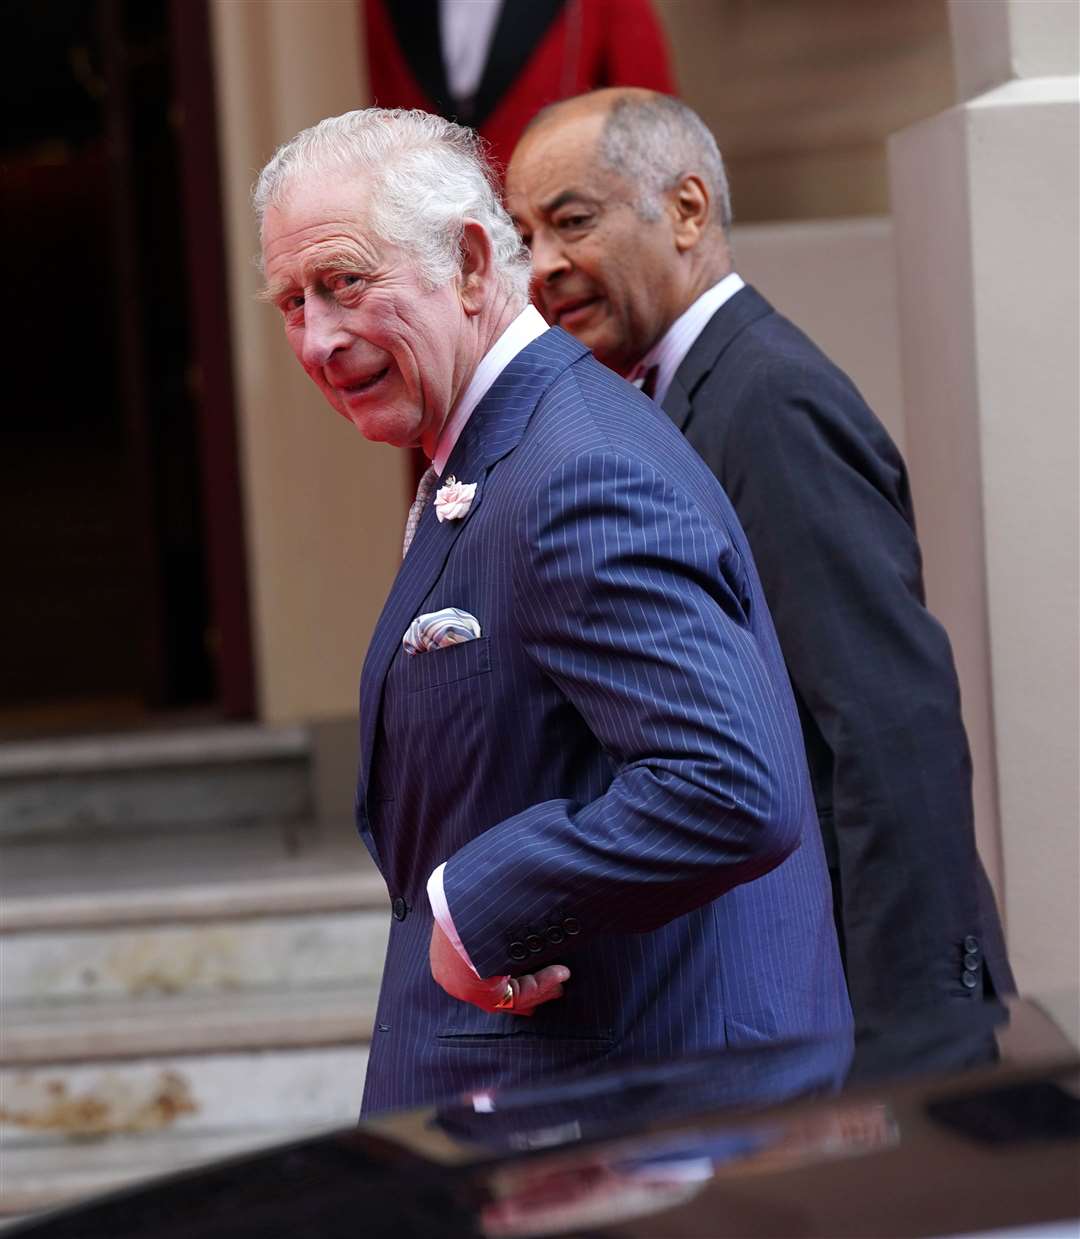 Charles has reportedly expressed opposition to the policy several times in private (Yui Mok/PA)